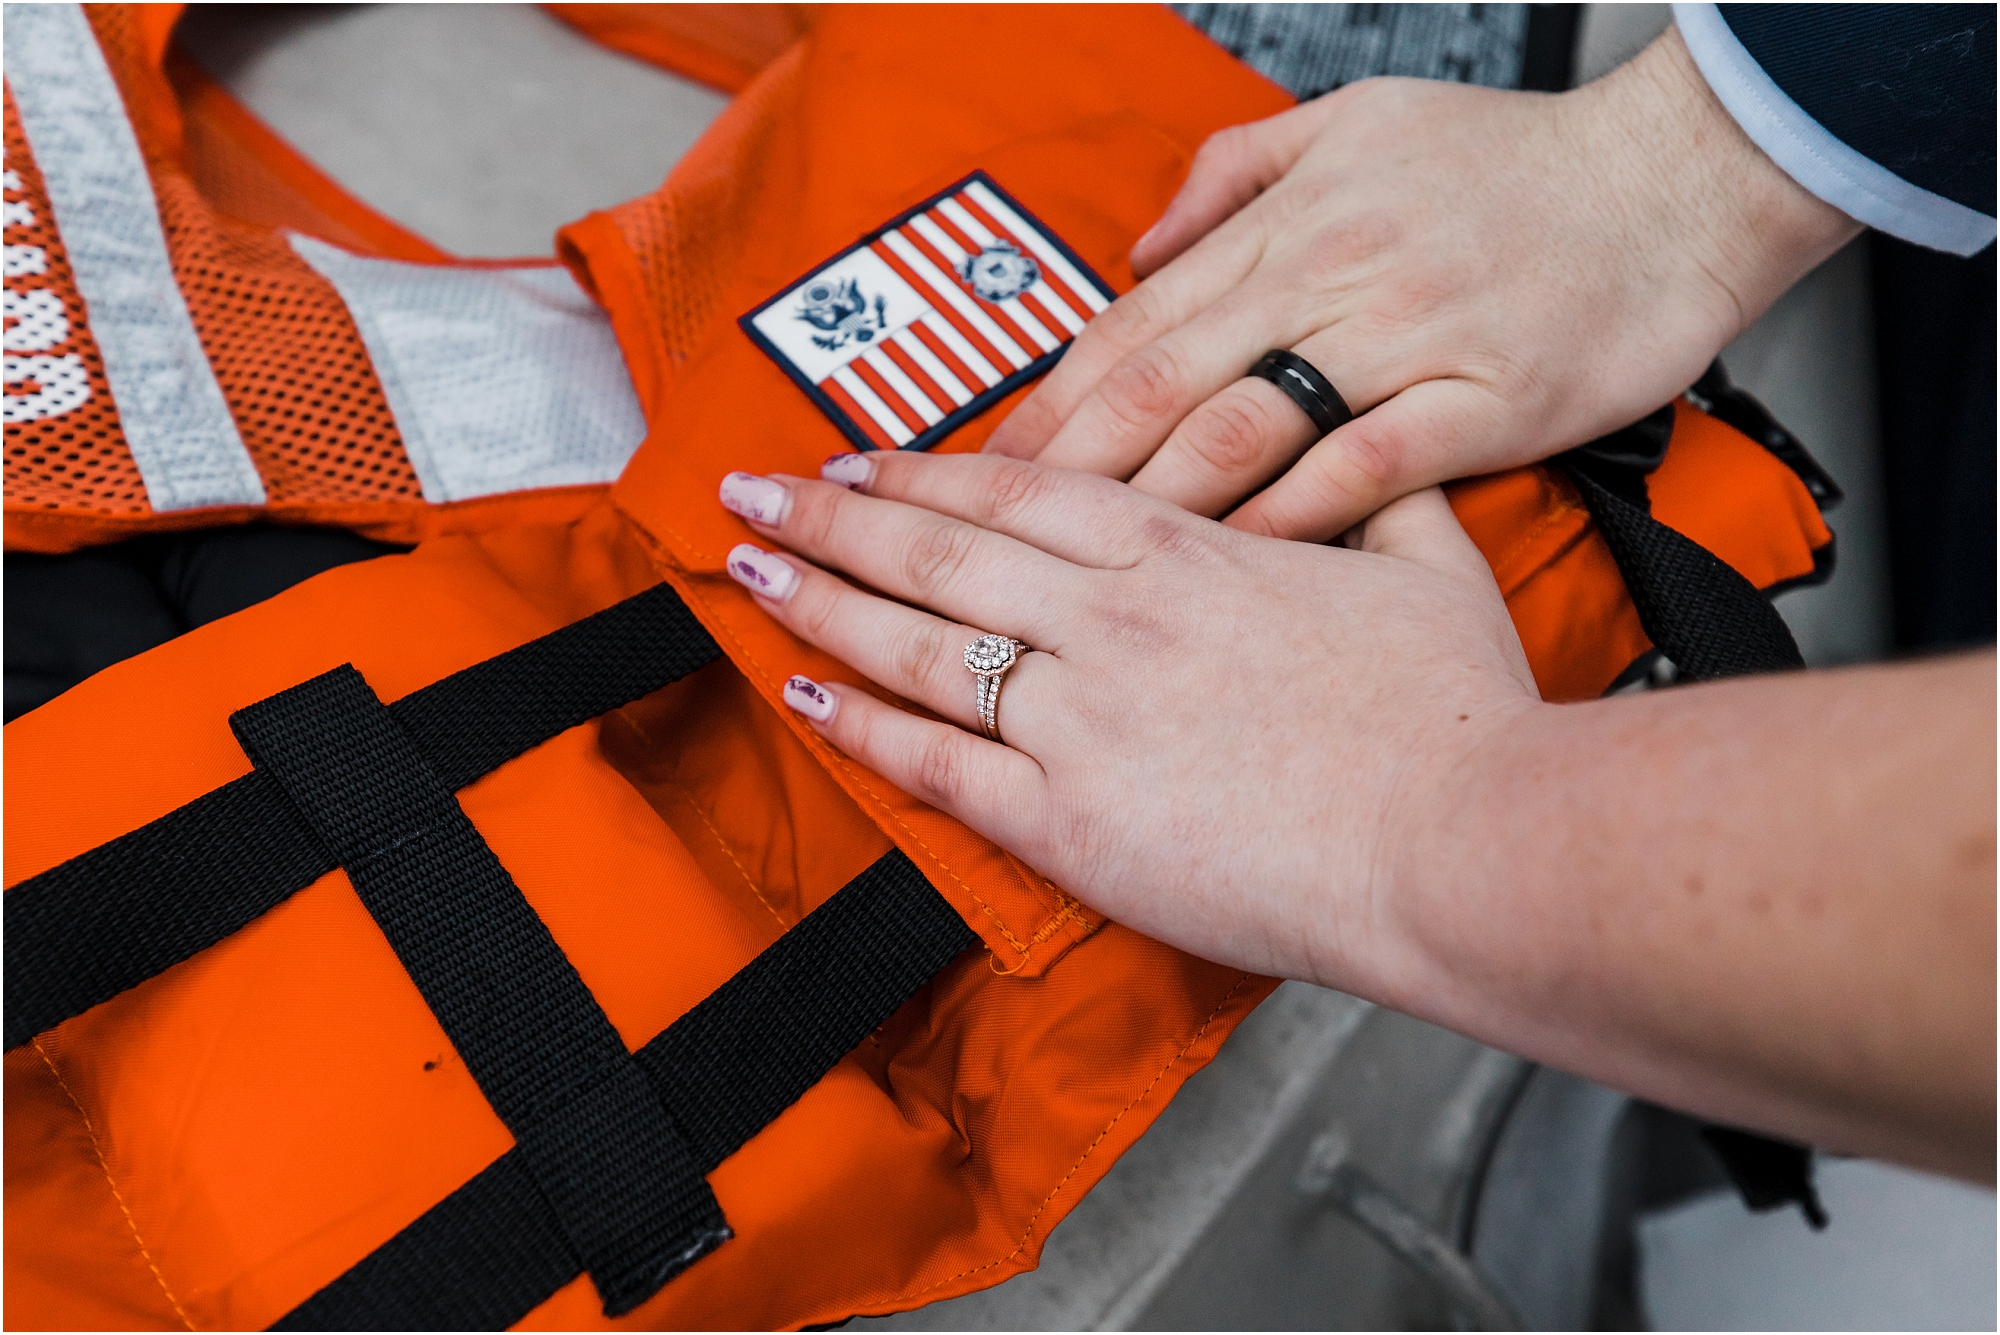 Wedding bands on the hands of the bride and groom, resting on a orange life jacket, which was used for their Oregon Coast Guard elopement. | Erica Swantek Photography